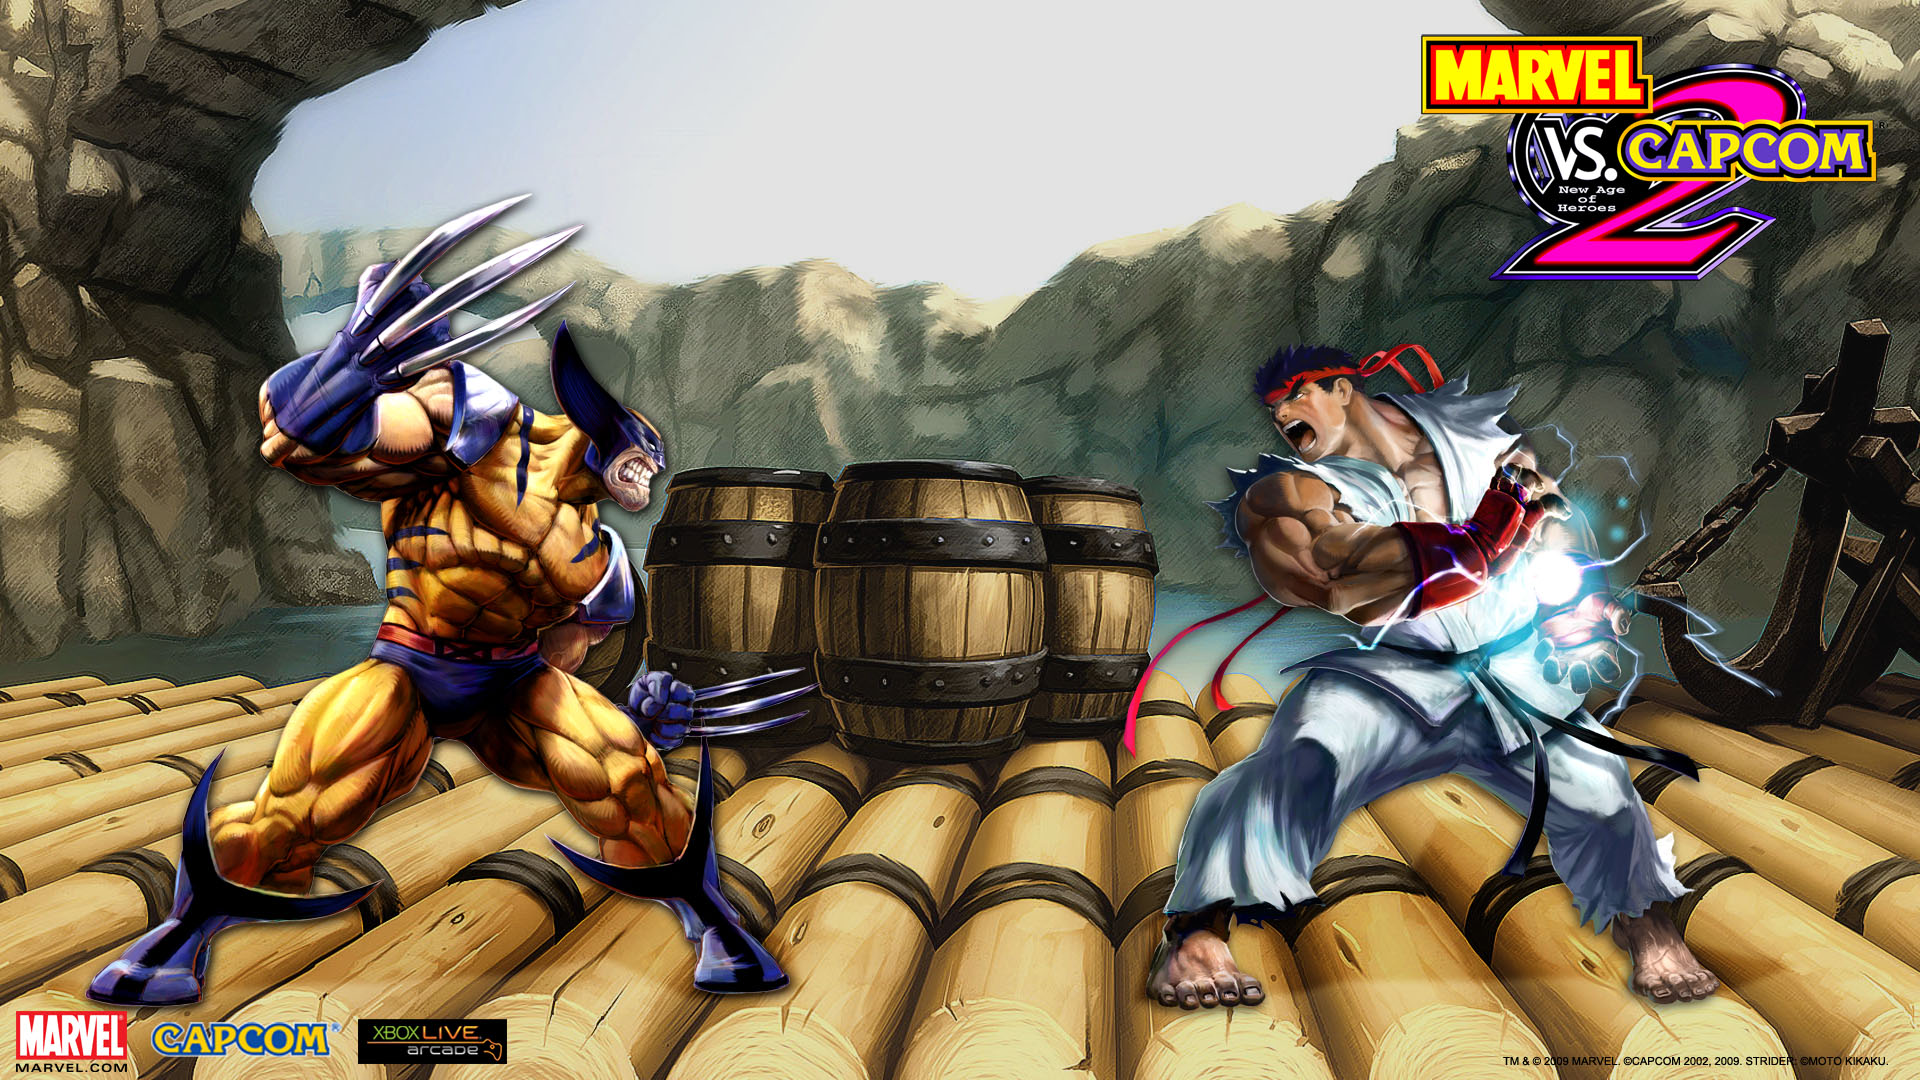 10+ Marvel Vs. Capcom 2 HD Wallpapers and Backgrounds